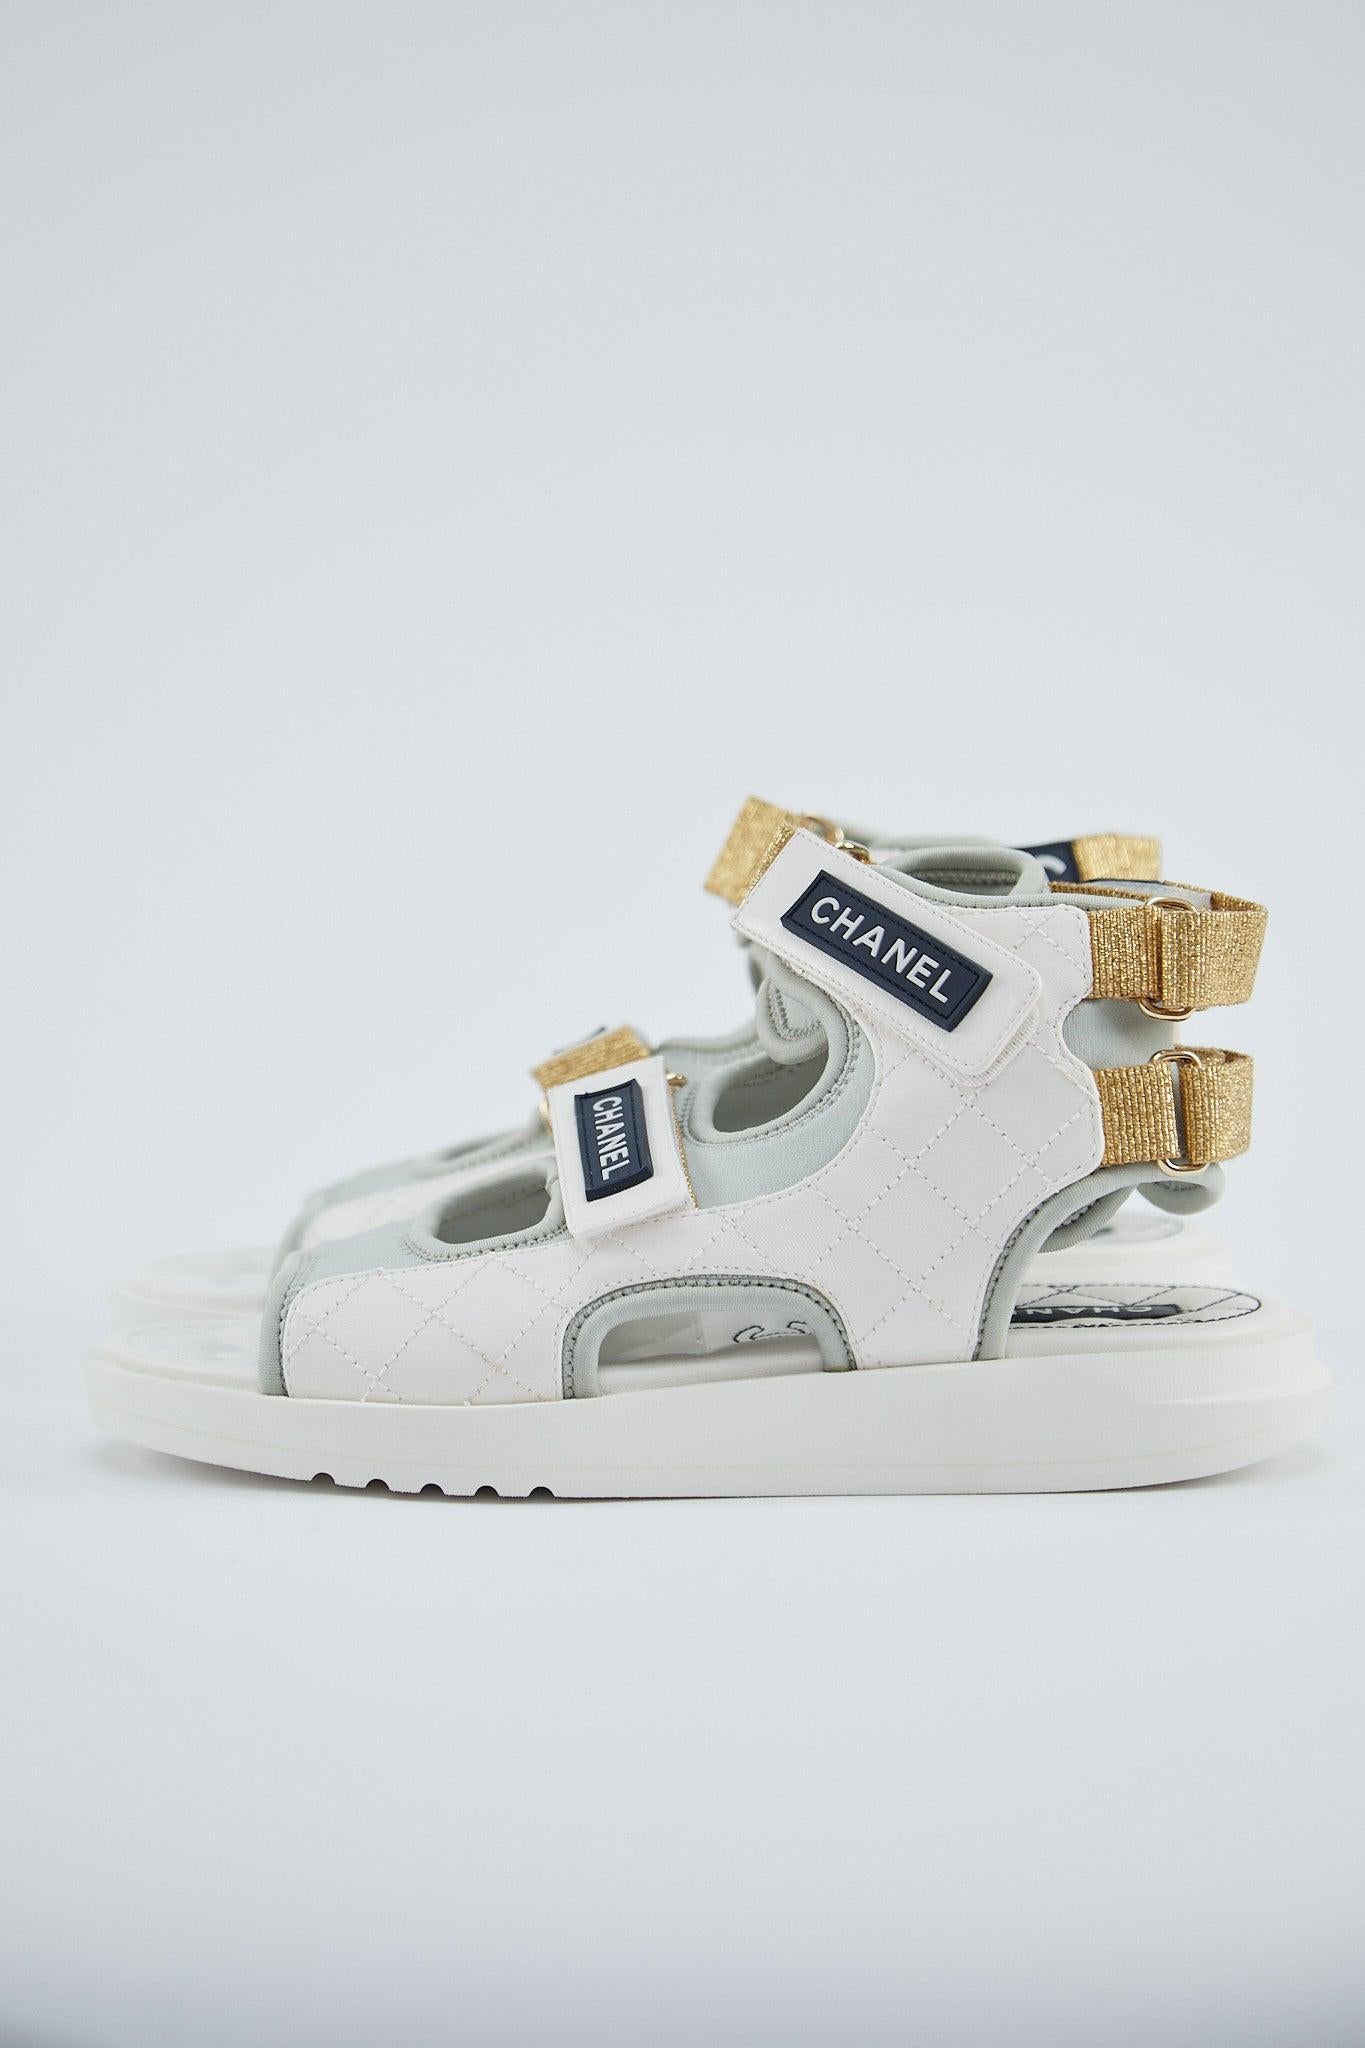 CHANEL GLADIATOR SANDAL White & Grey - Size 38.5 In Excellent Condition For Sale In London, GB